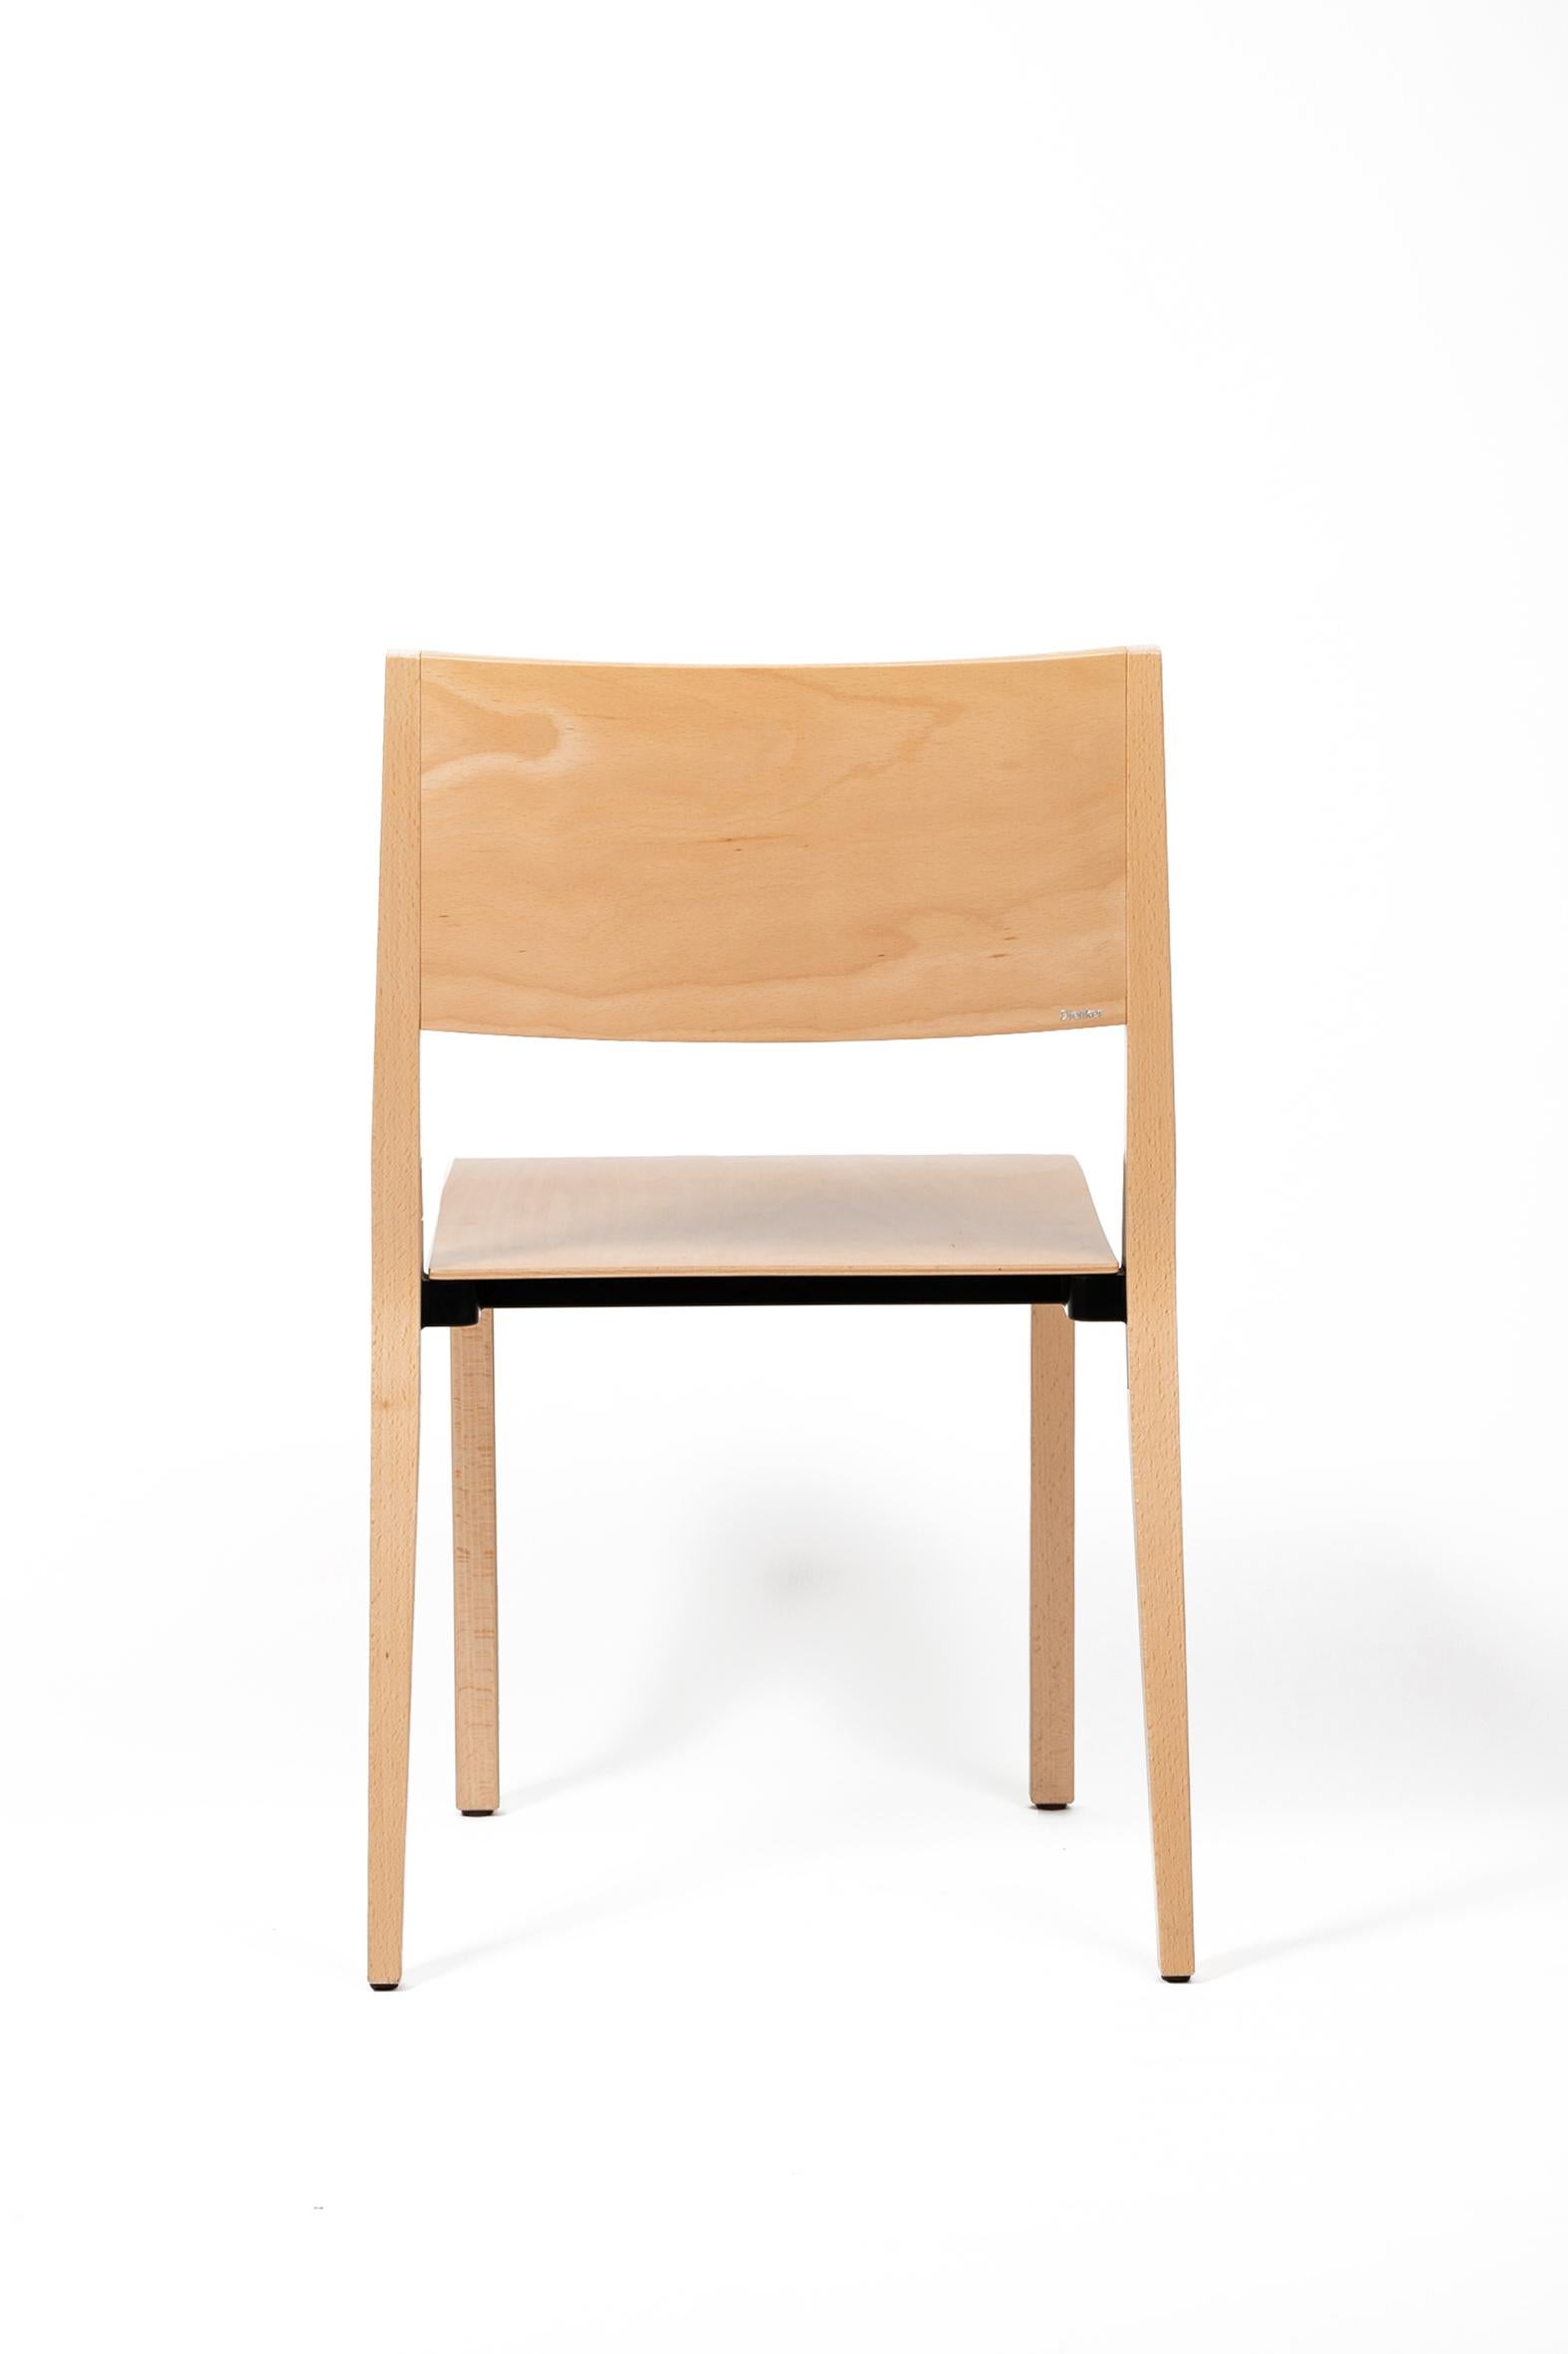 Hungarian Dietiker Base Modern Dining Chair, Designed by Greutmann Bolzern, in Stock